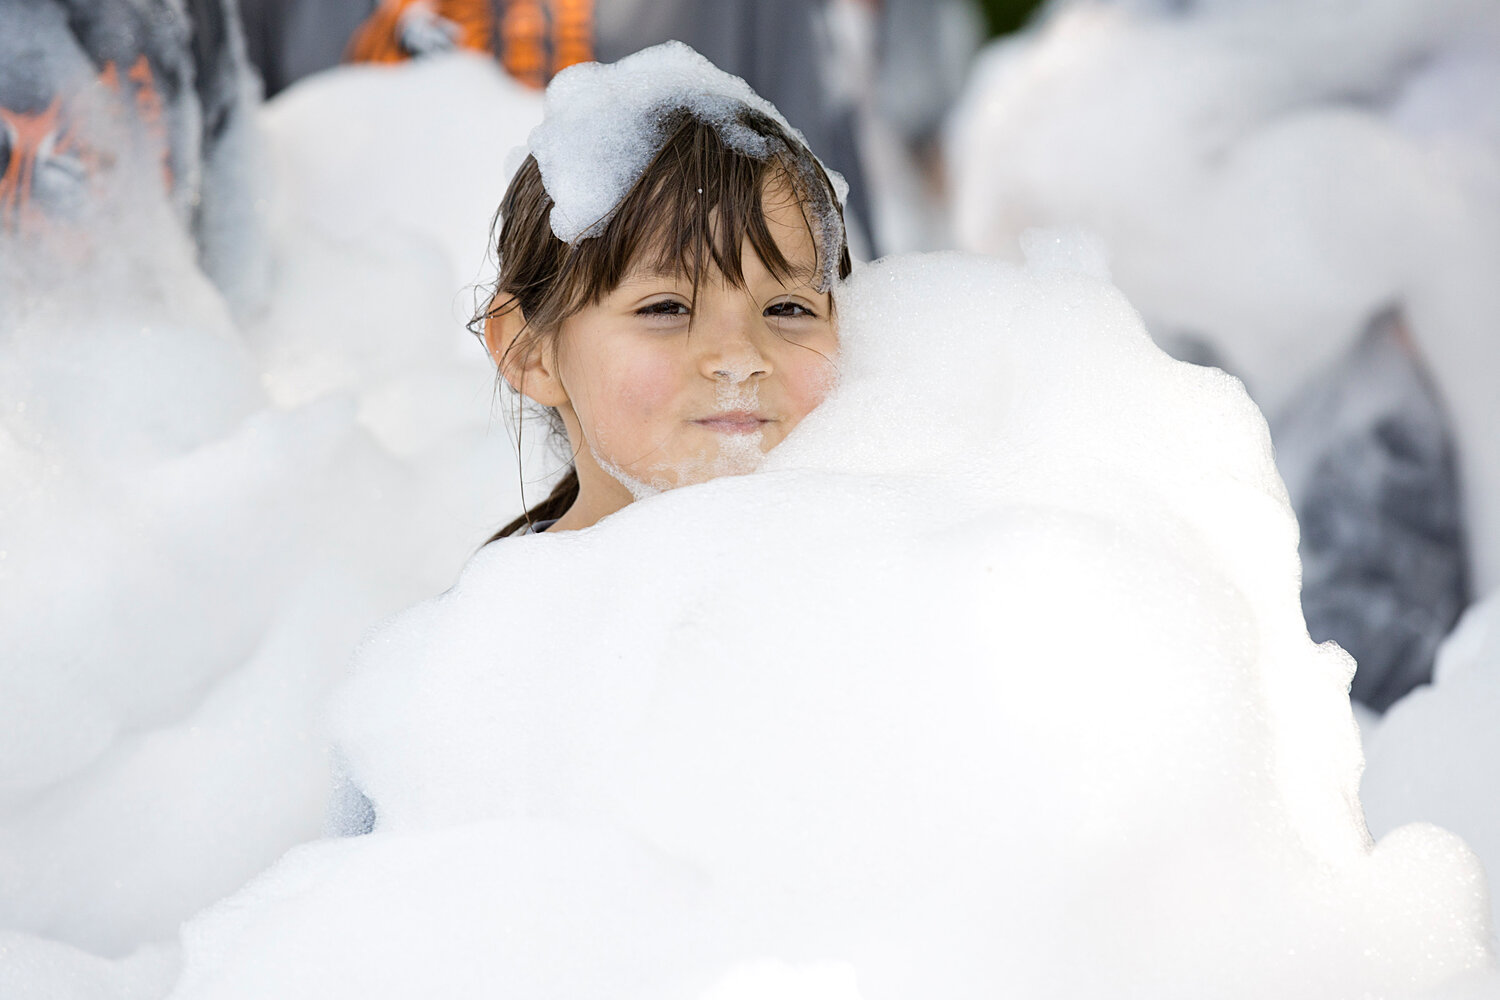 The bubble pit obstacle proved to be the most popular among children participating in Hampden Meadow's "Tough Tiger" event, Sunday.